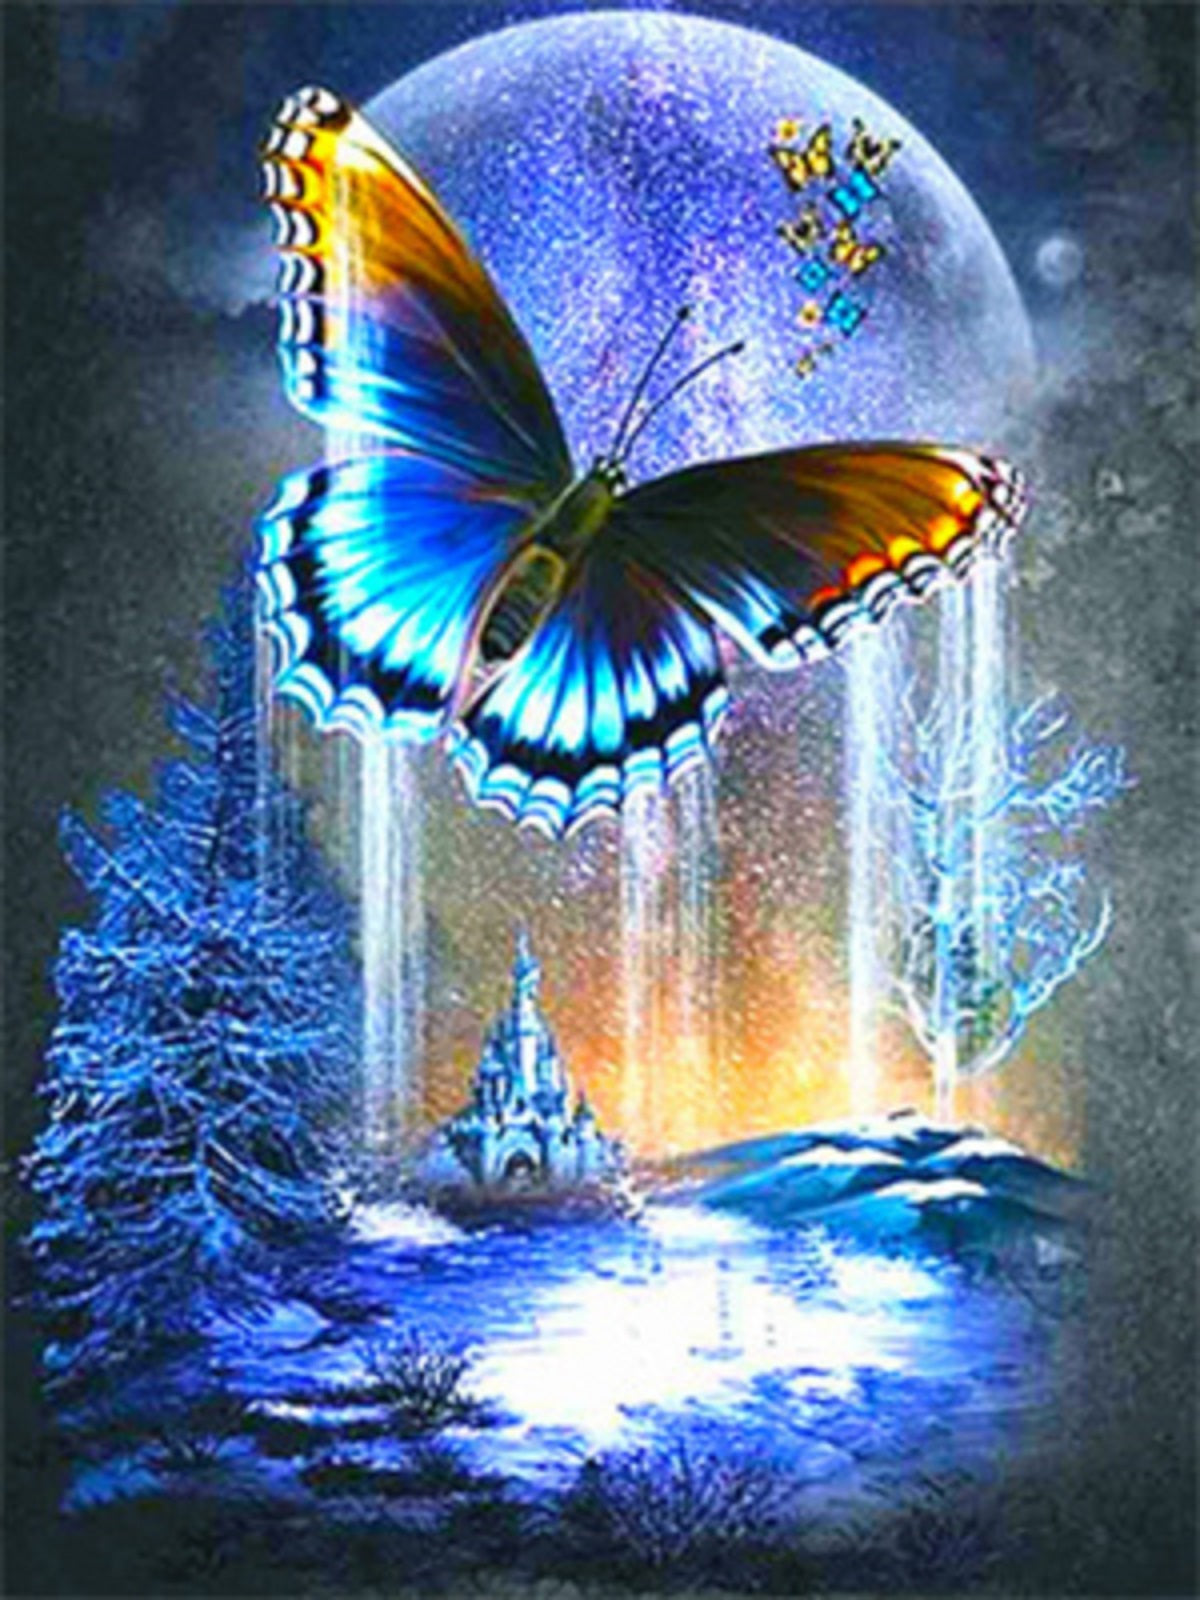 DIY Diamond Painting Landscape Butterfly At Night With Full Moon Diamond Painting Kit Wall Art sm6